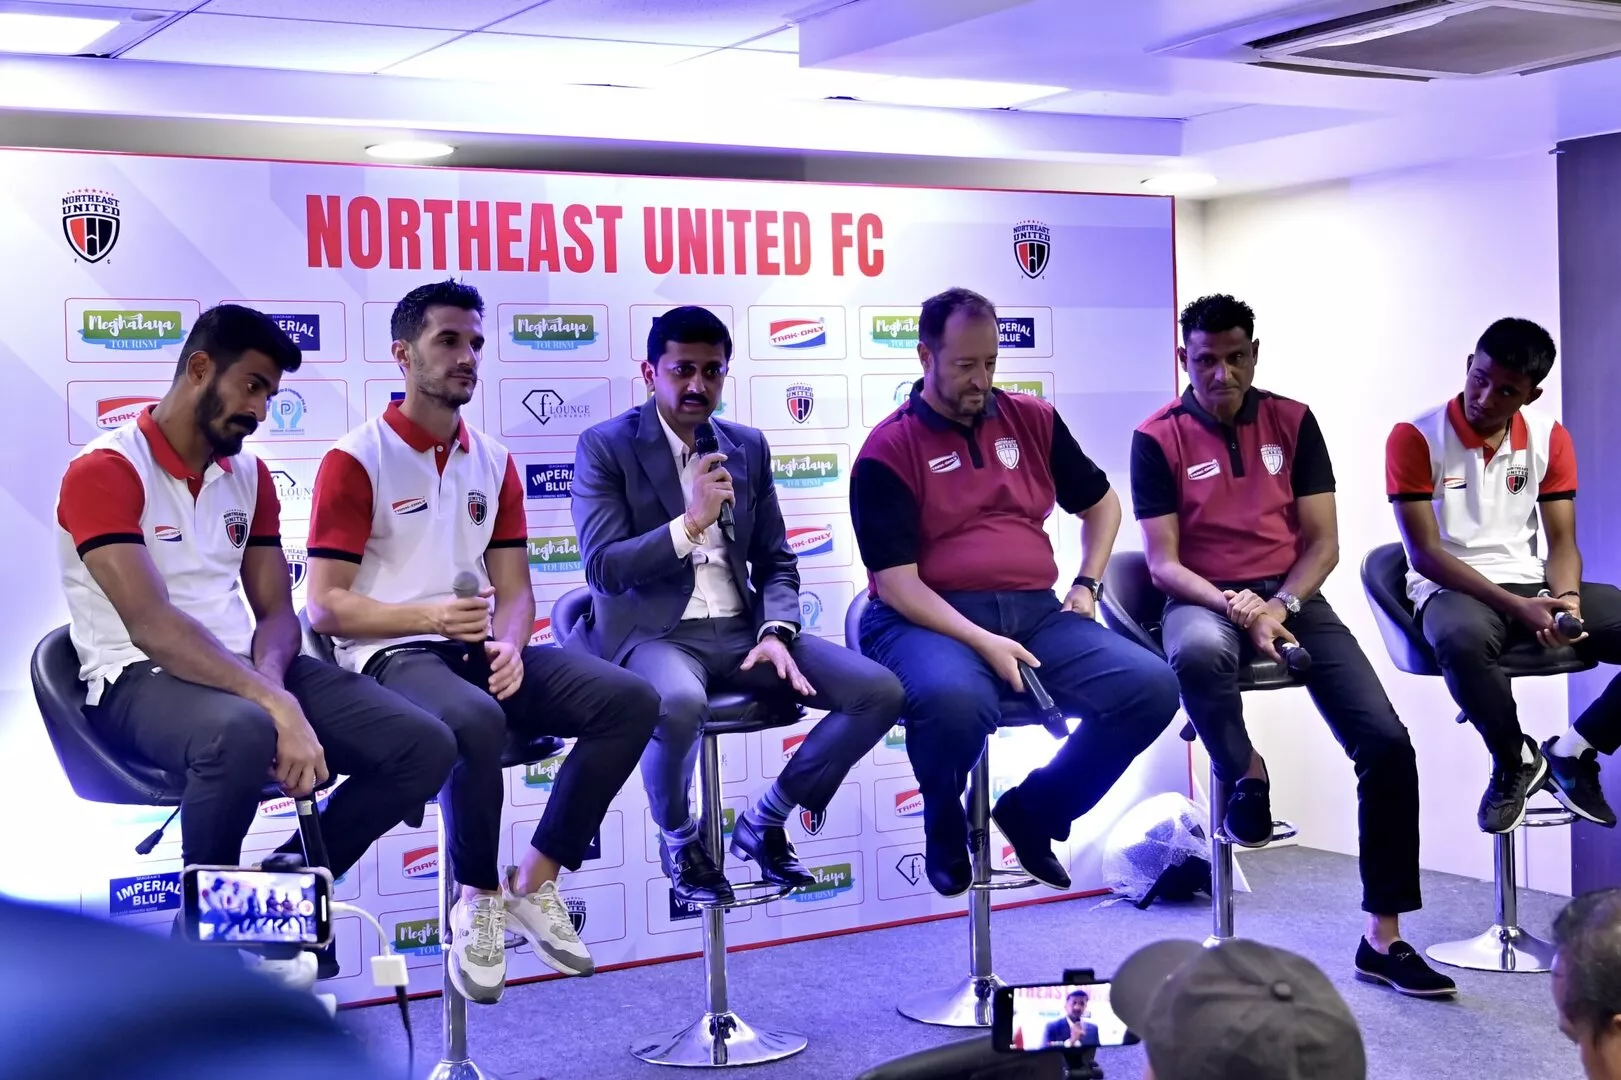 We should be able to have at least 3-4 centres by the end of May, 2024: NorthEast United FC CEO Mandar Tamhane